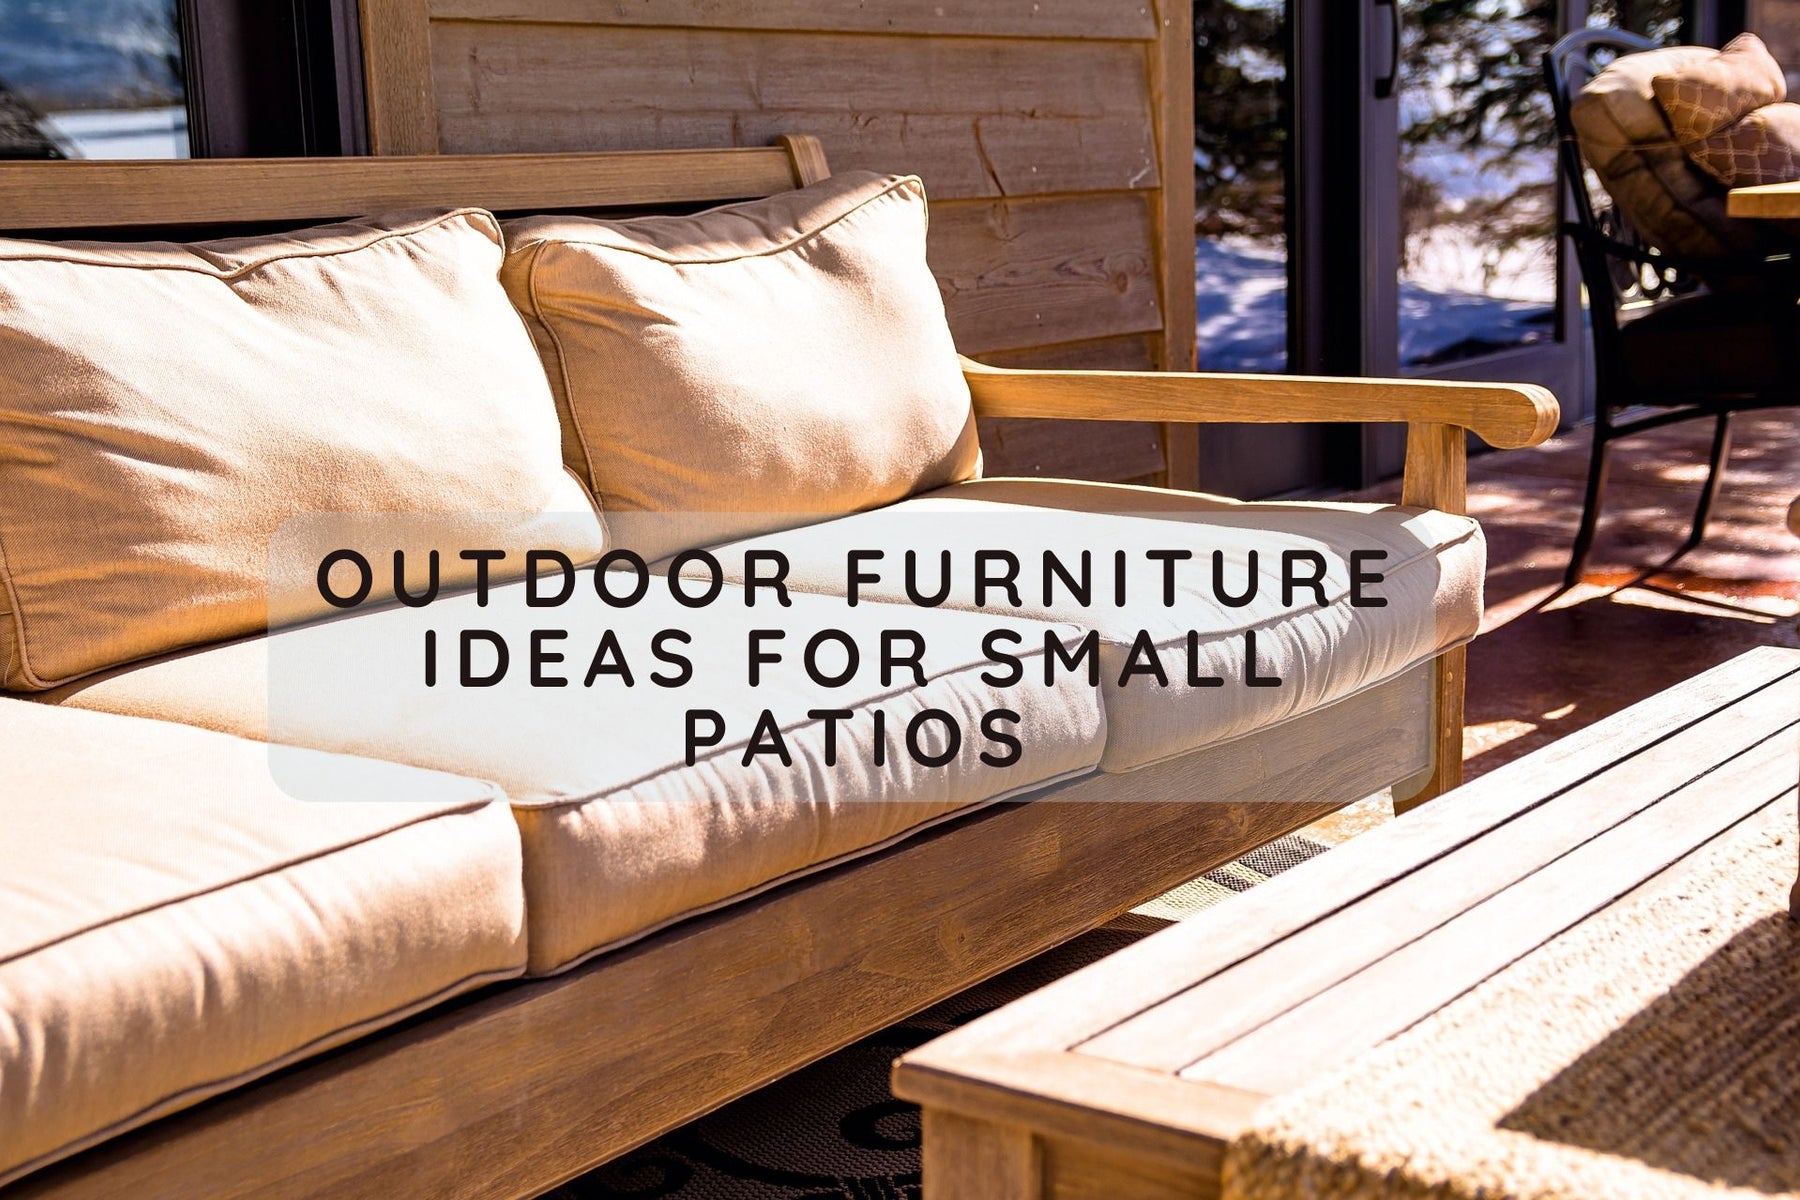 Outdoor Furniture Ideas for Small Patios